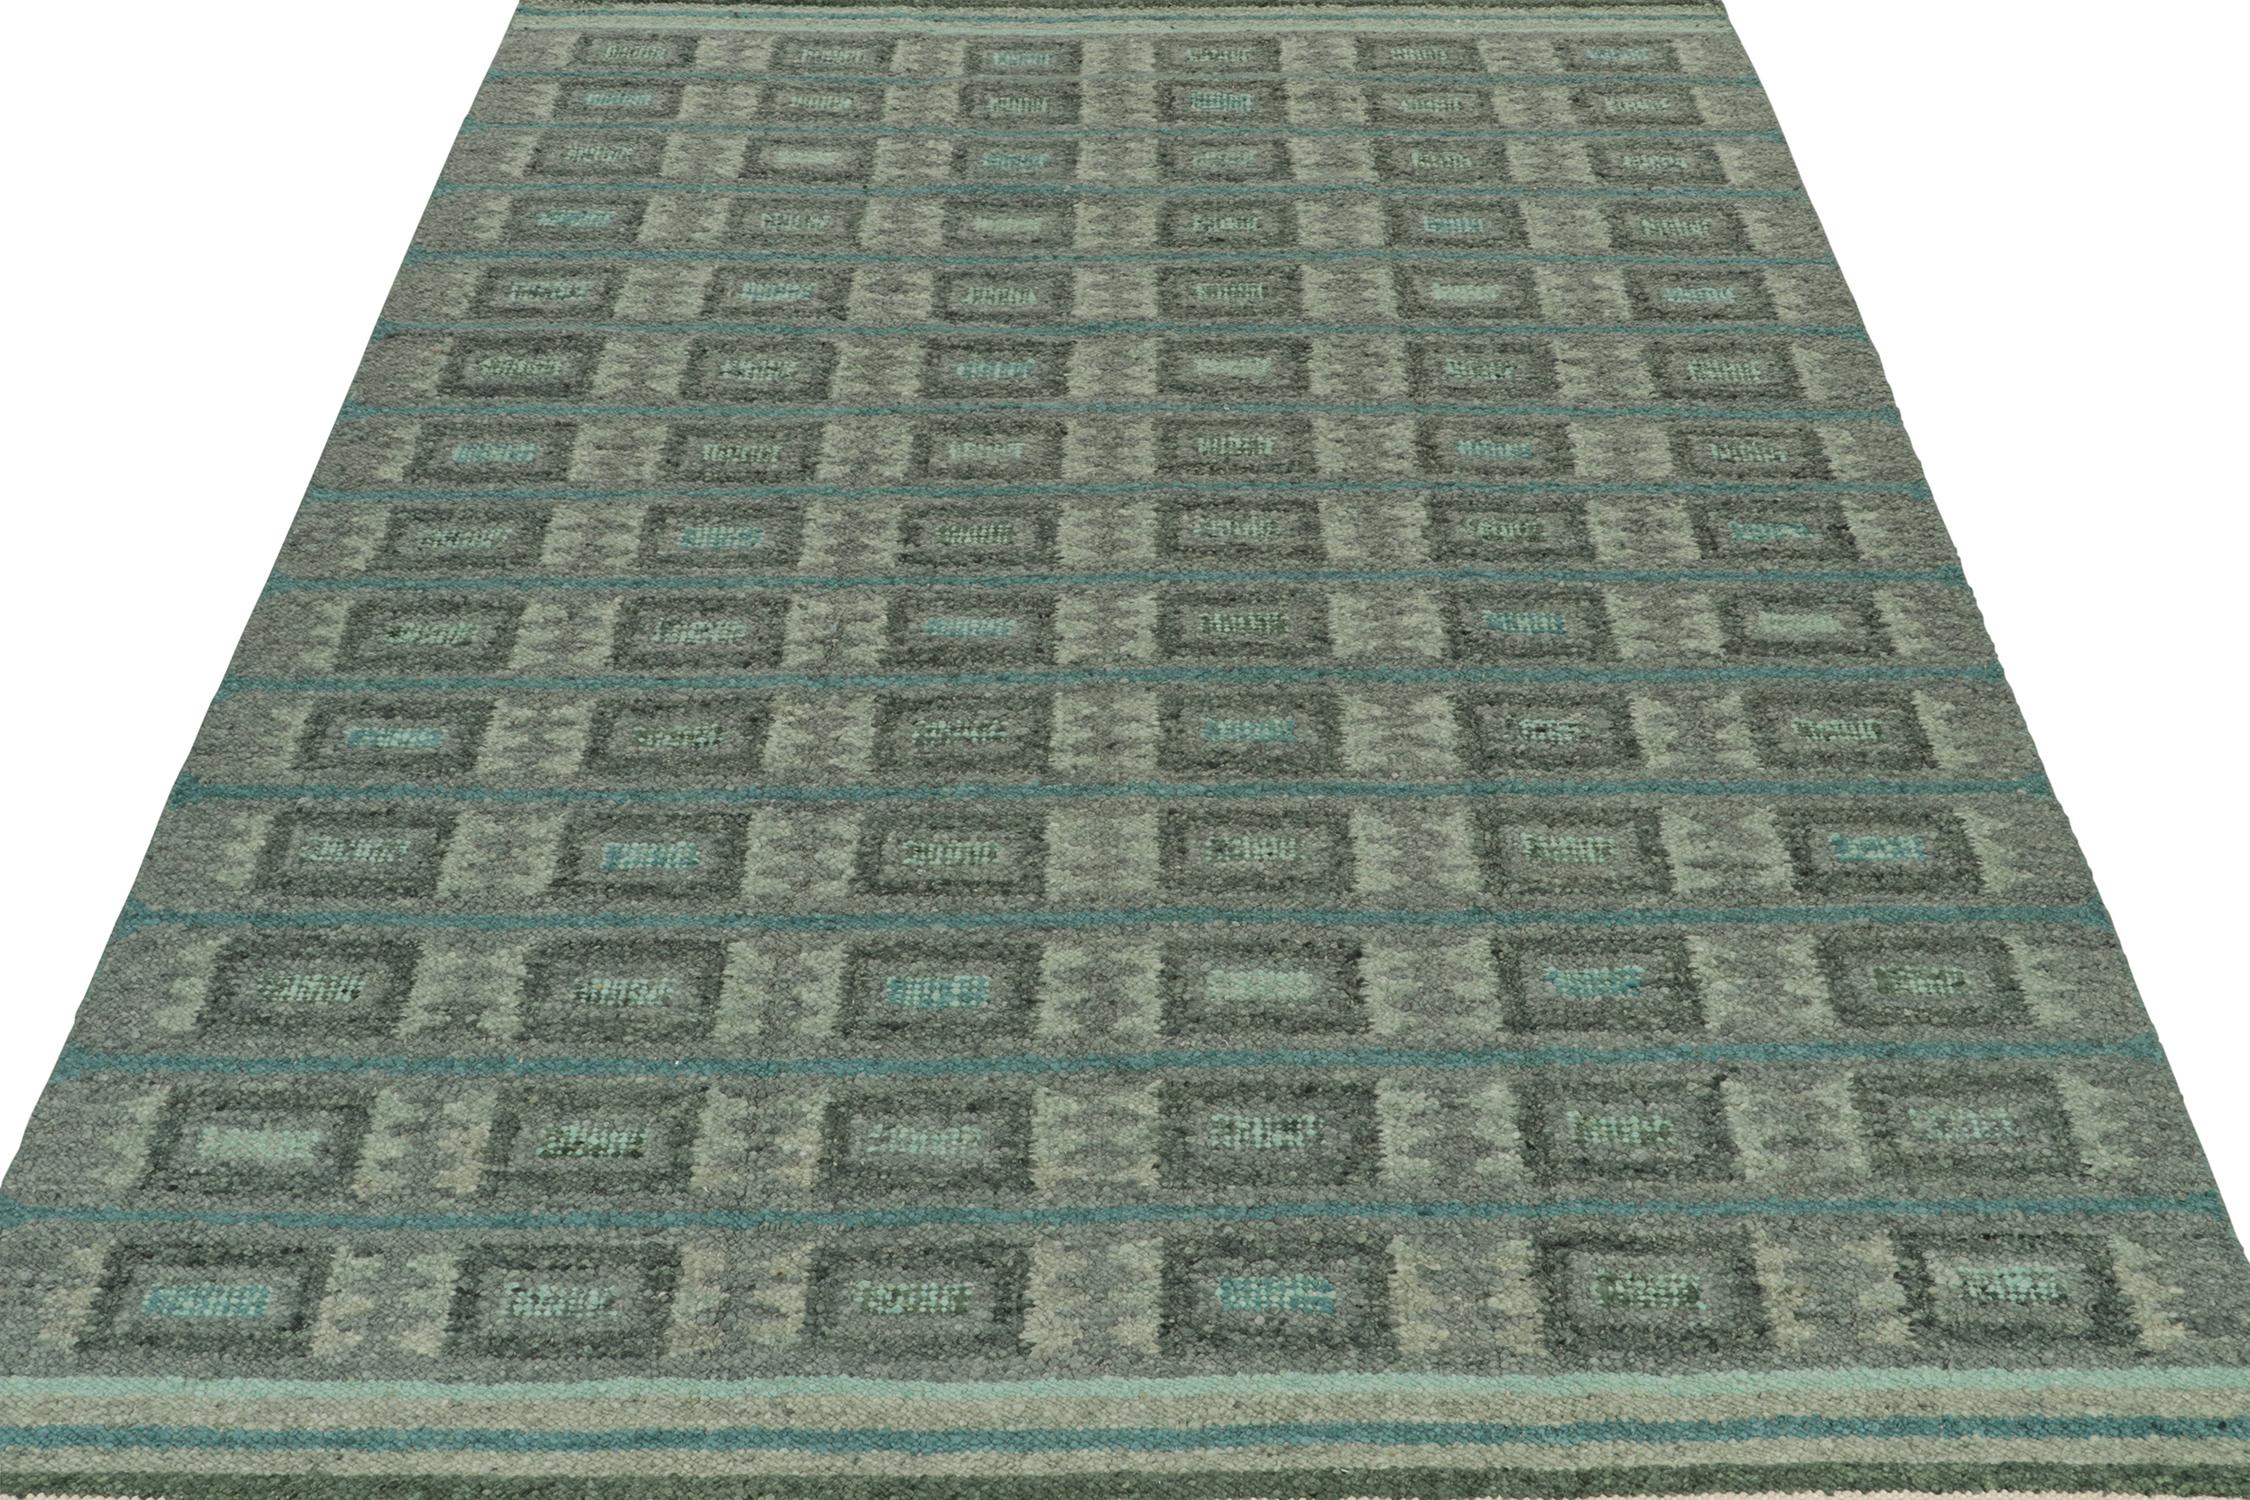 This 9x12 Swedish style kilim is from the inventive “Nu” texture in Rug & Kilim’s award-winning Scandinavian flat weave collection. Handwoven in wool. 

Further On the Design: 

This rug enjoys a boucle-like texture of blended yarns, and a look